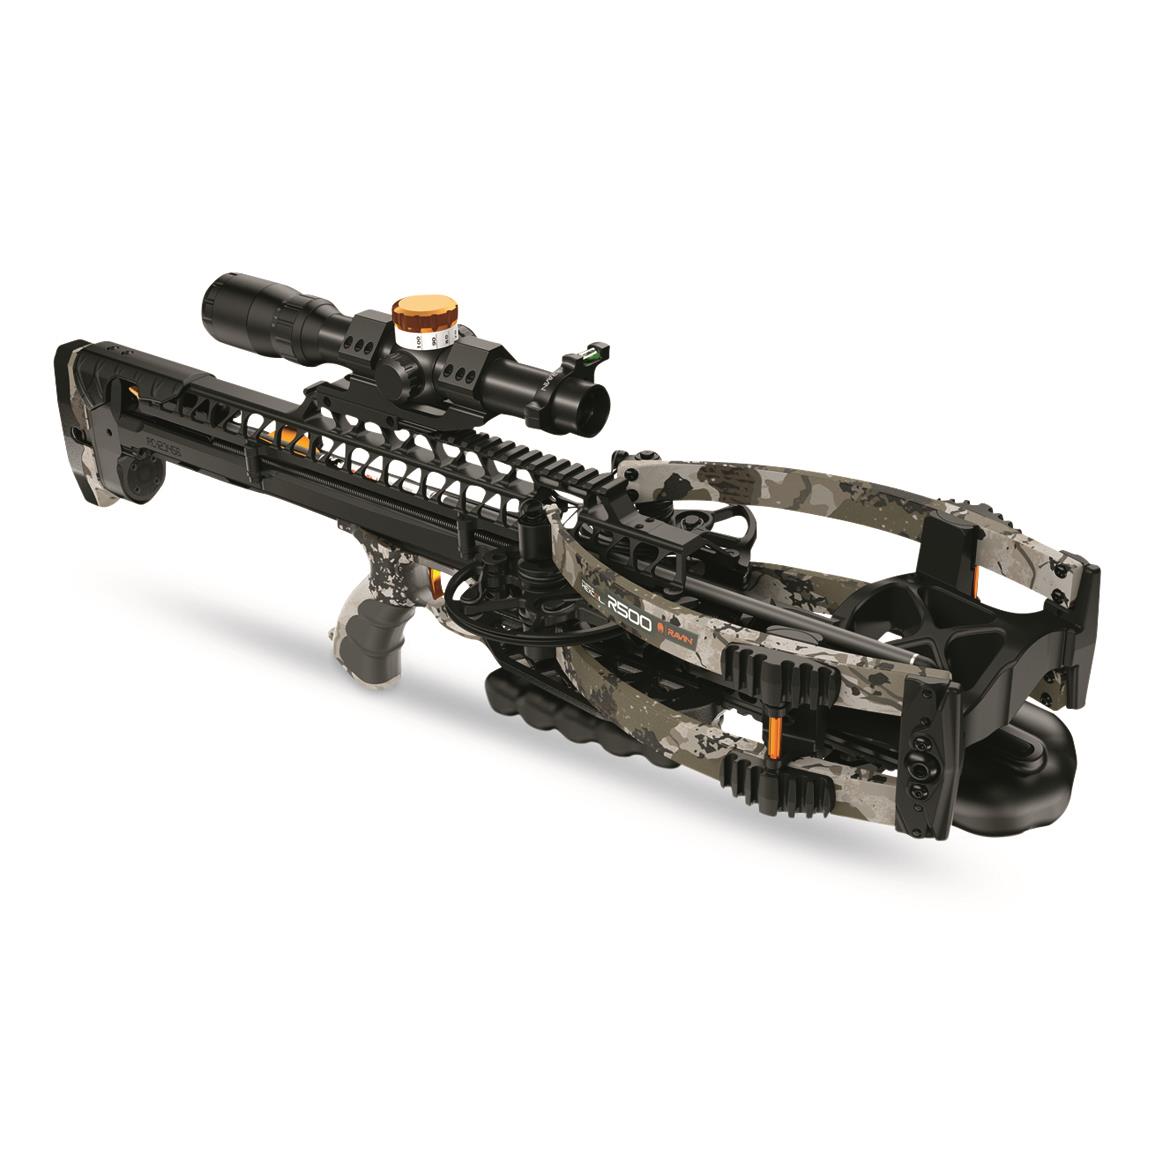 Ravin R500 Cossbow Sniper Package, King's XK7 Camo